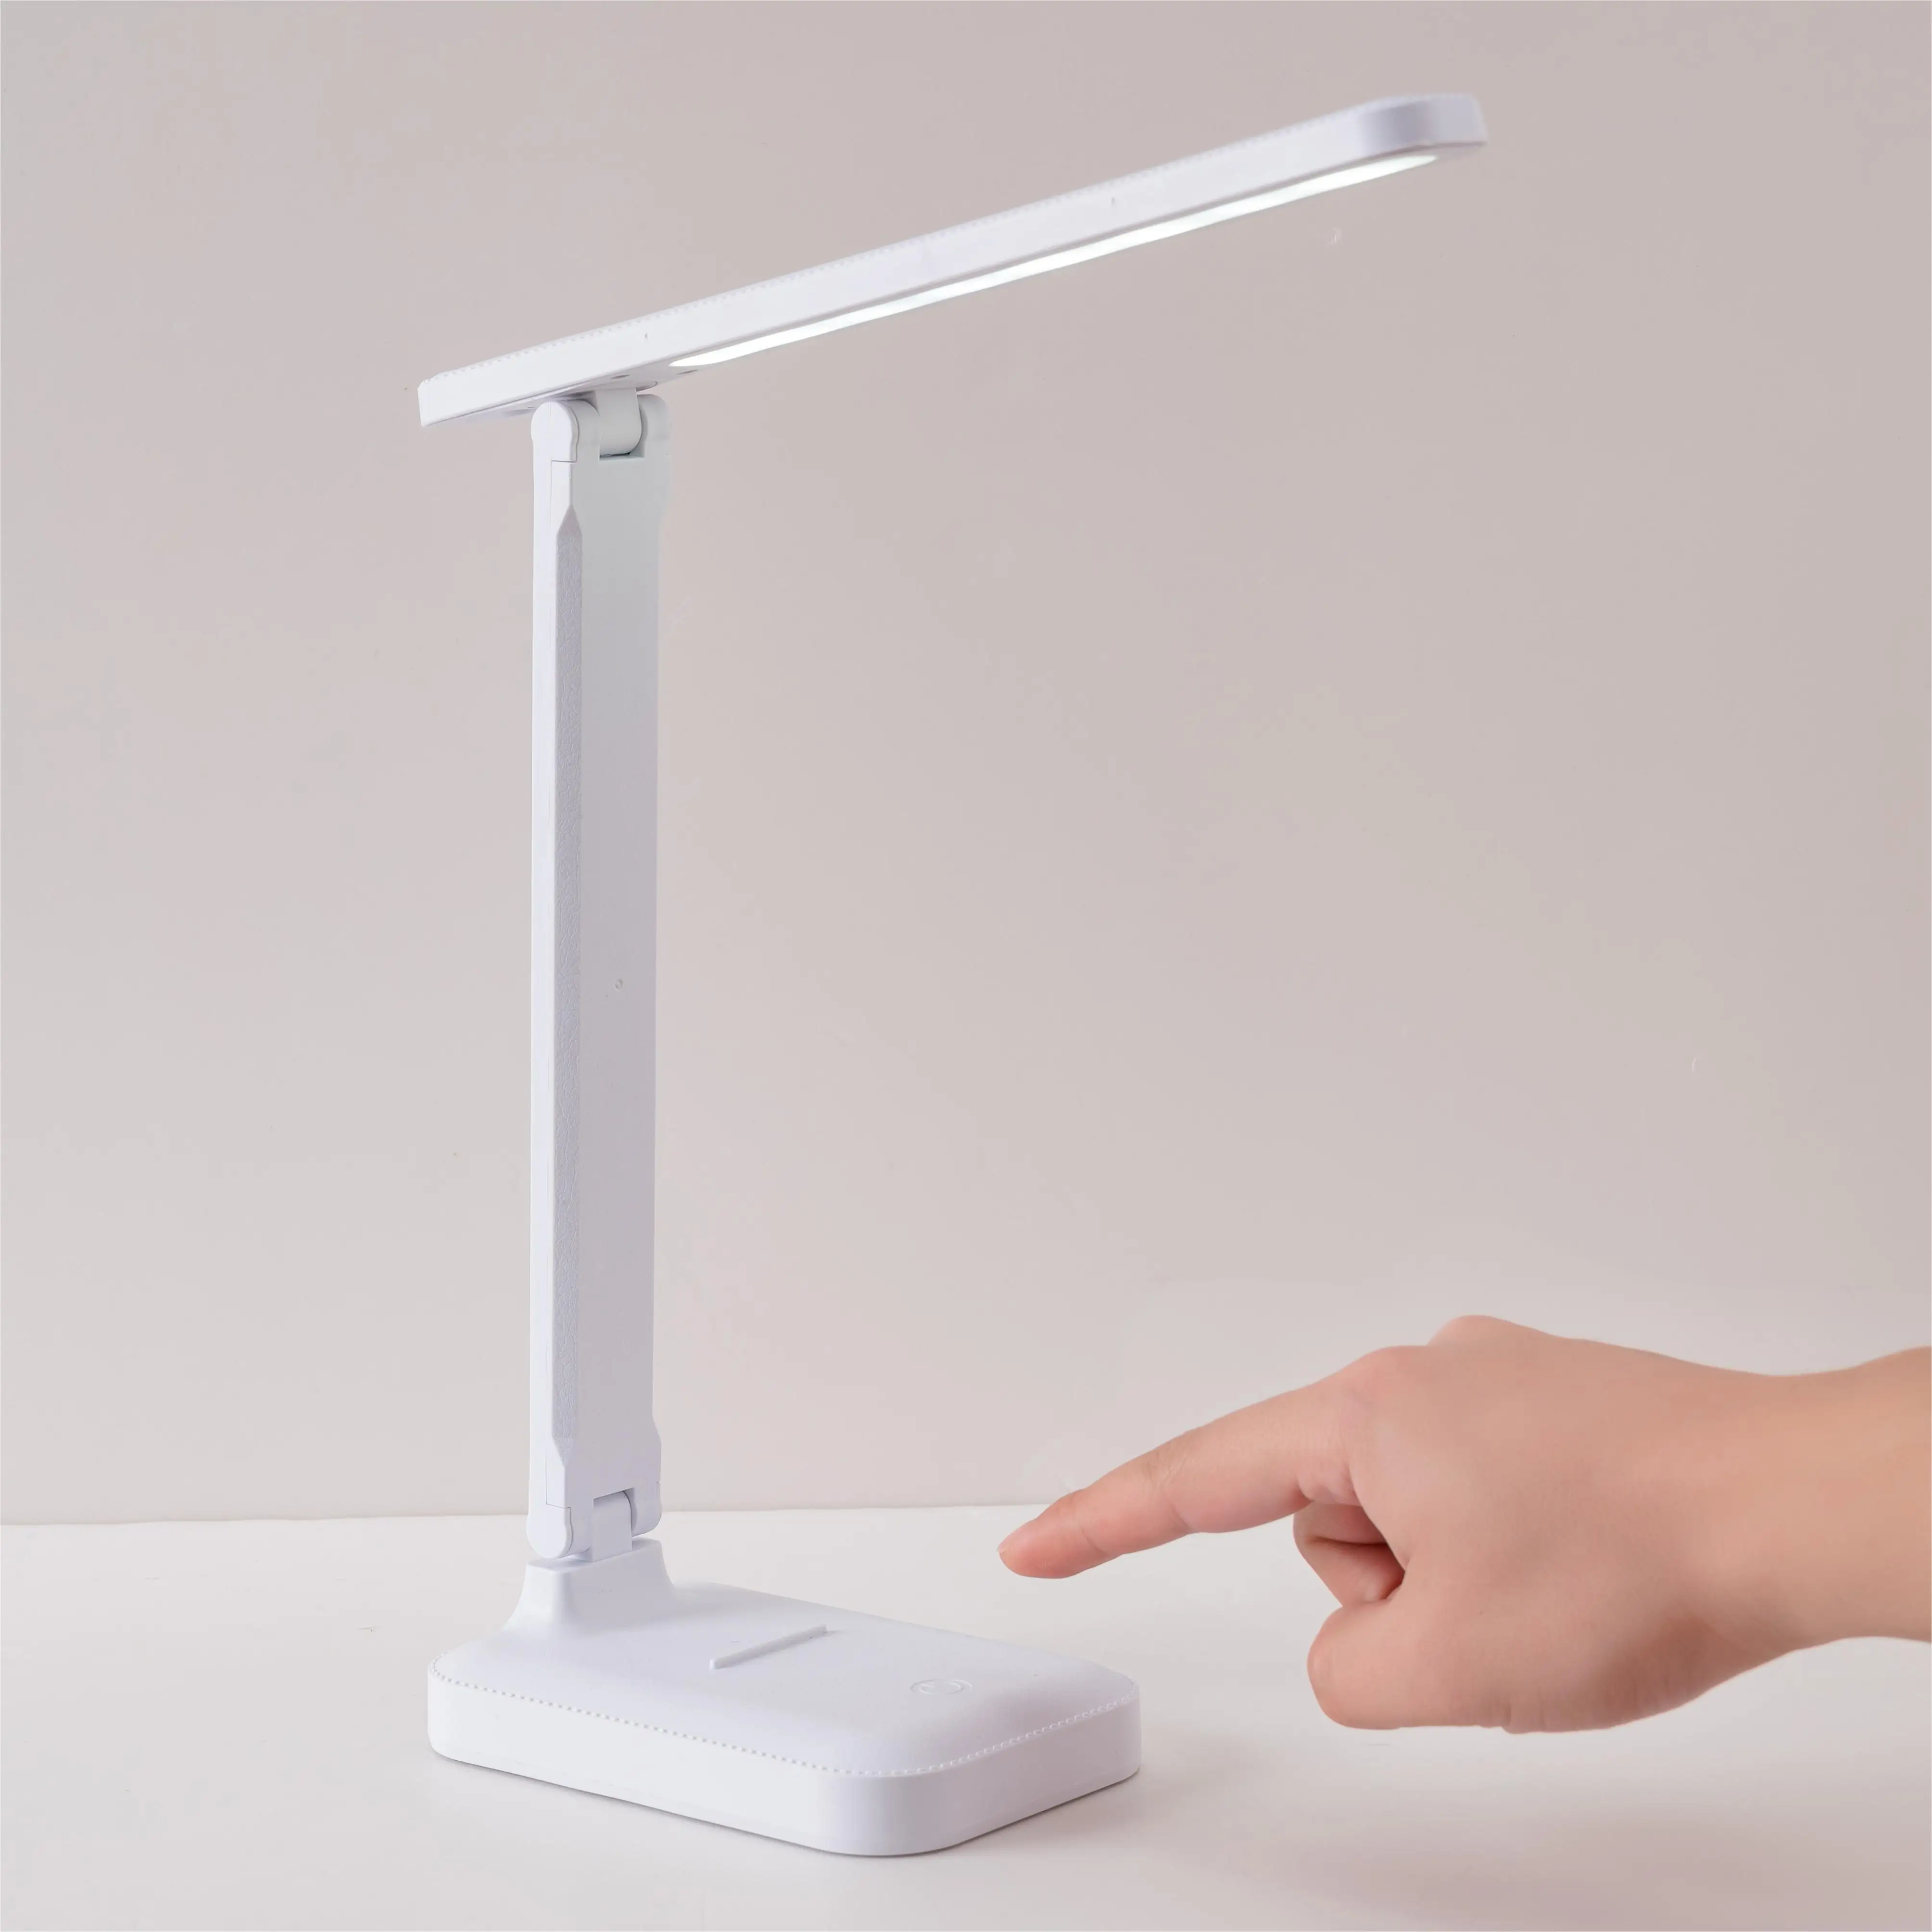 Eye Protection Foldable Led Desk Lamp Modern Bedroom Rechargeable Study Light with USB Charging Port